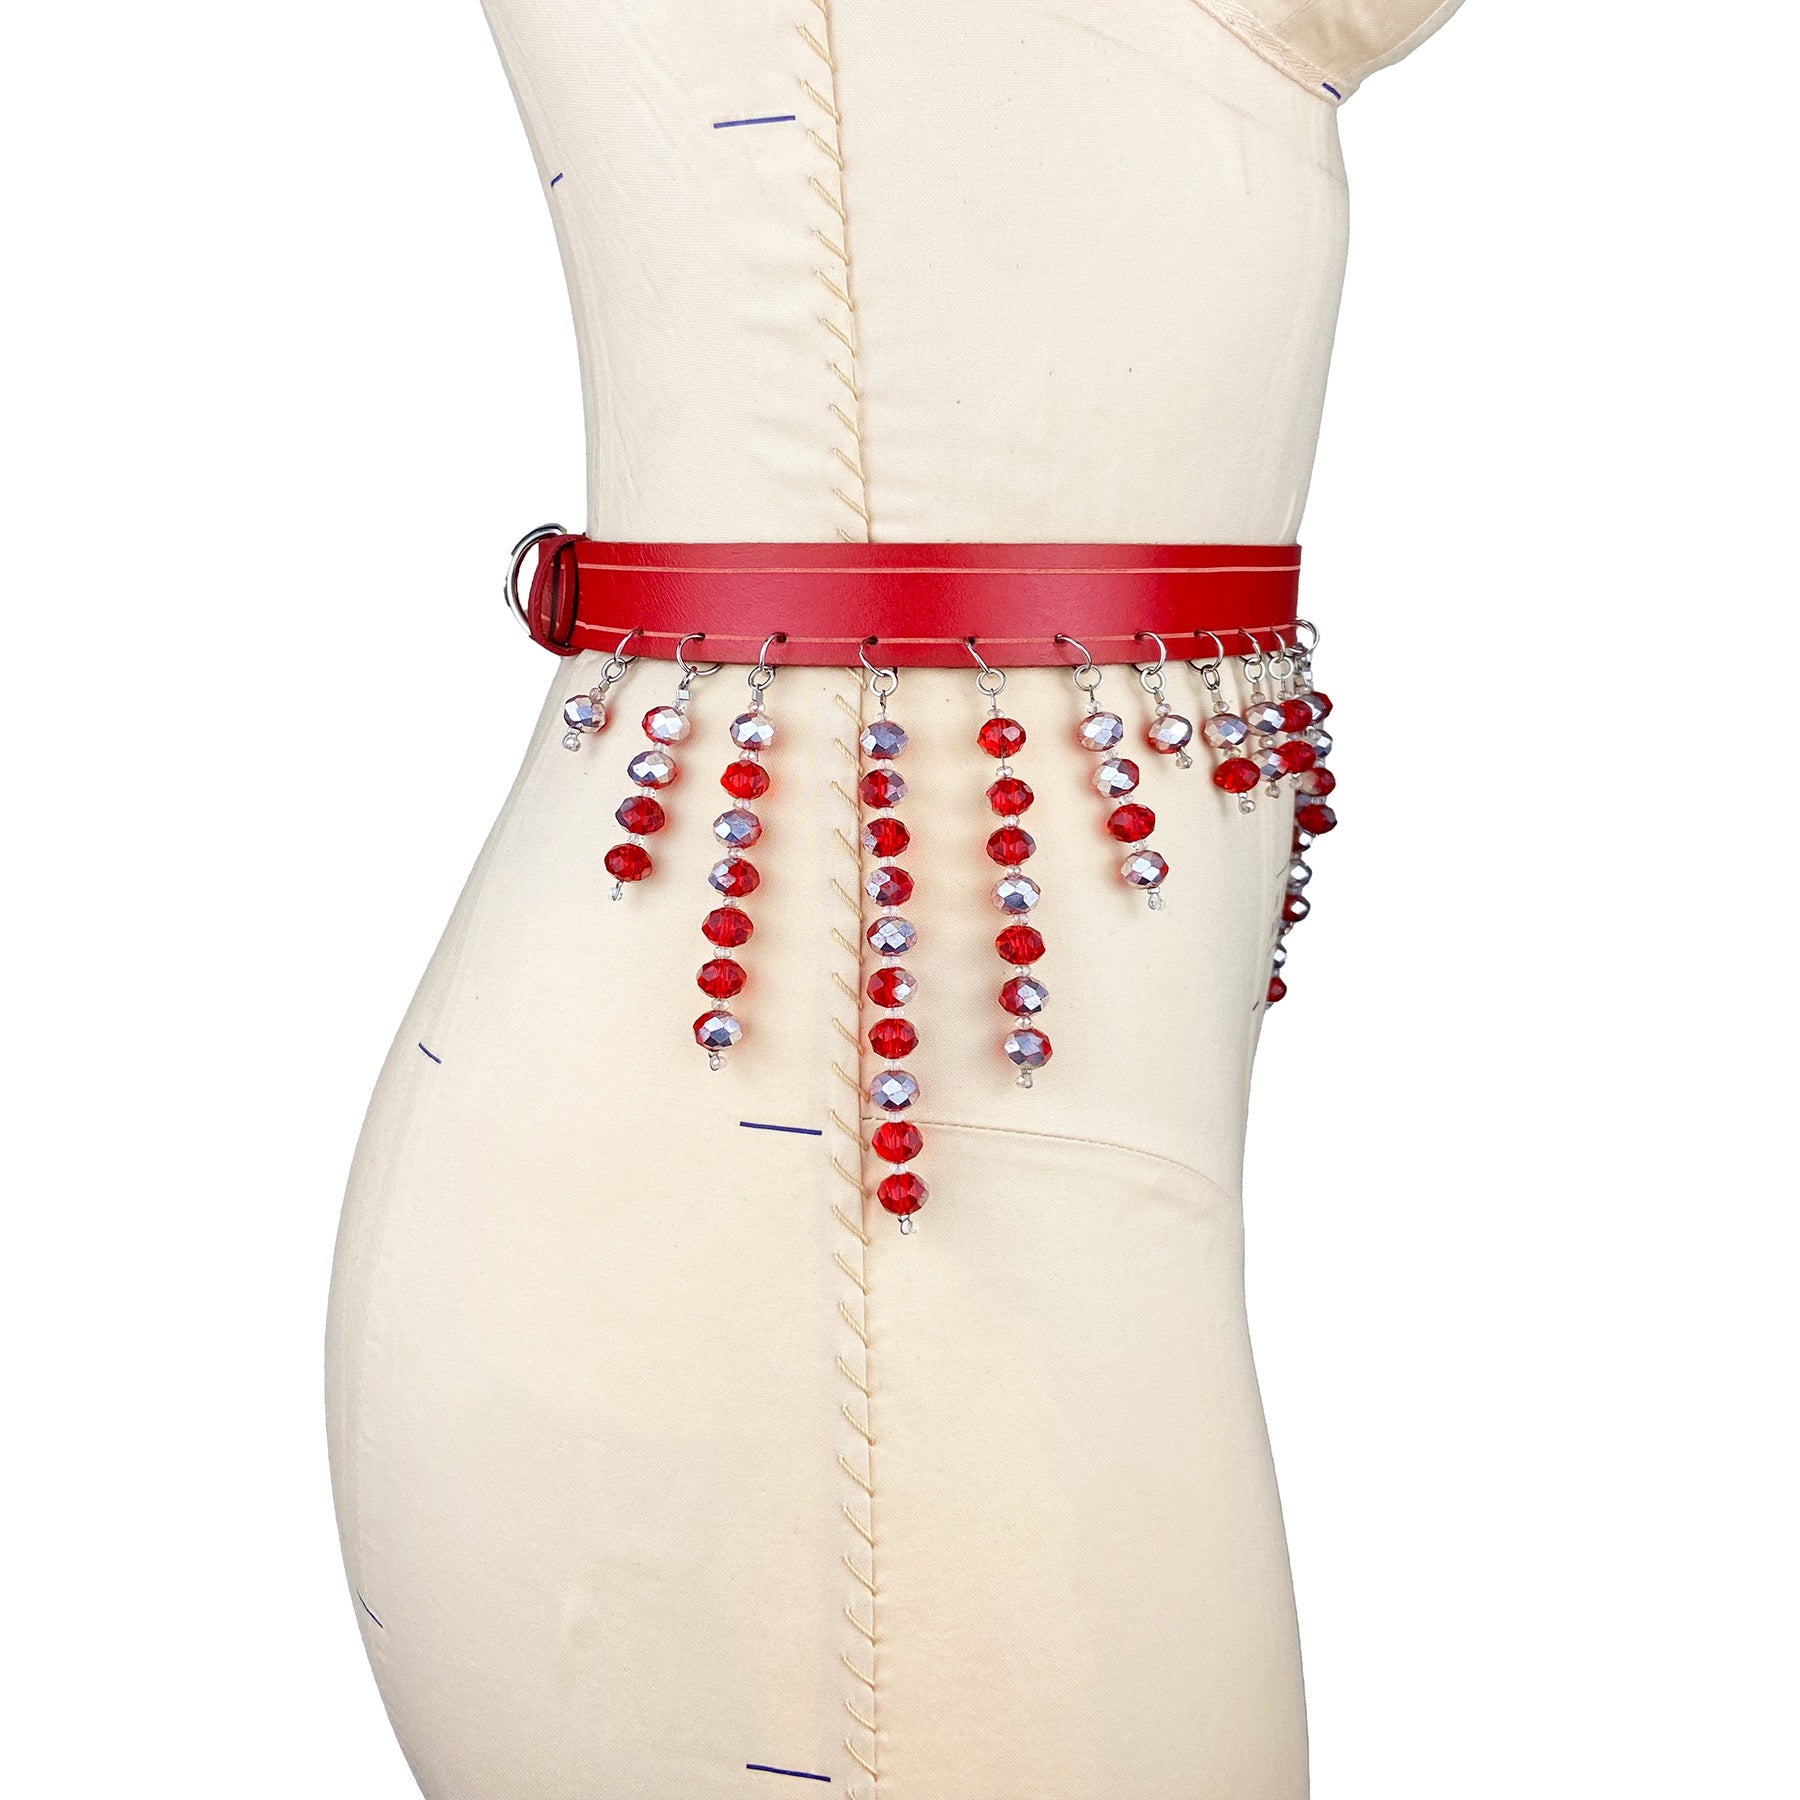 red italian leather luxury belt, sample sale, vintage beads, hand etched, leather work